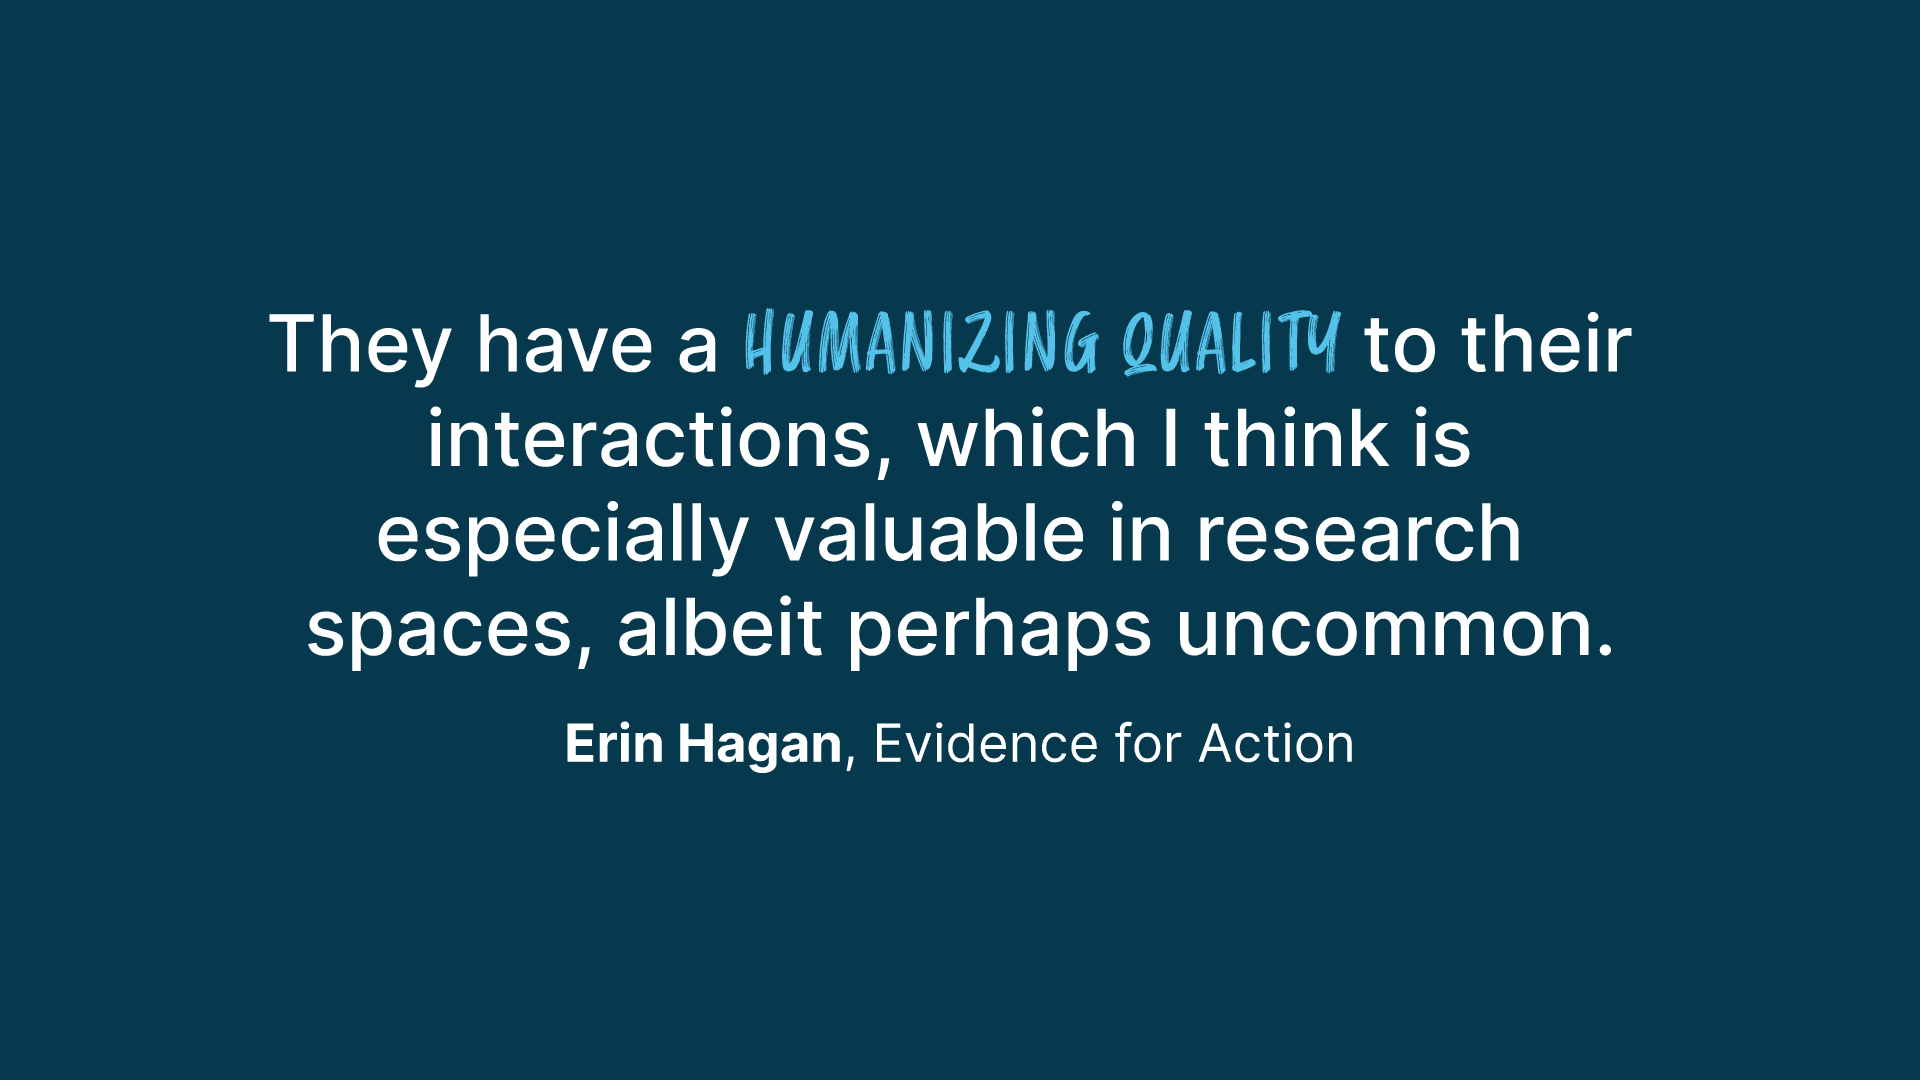 Quote from Erin Hagan, Evidence for Action: "They have a humanizing quality to their interactions, which I think is especially valuable in research spaces, albeit perhaps uncommon."